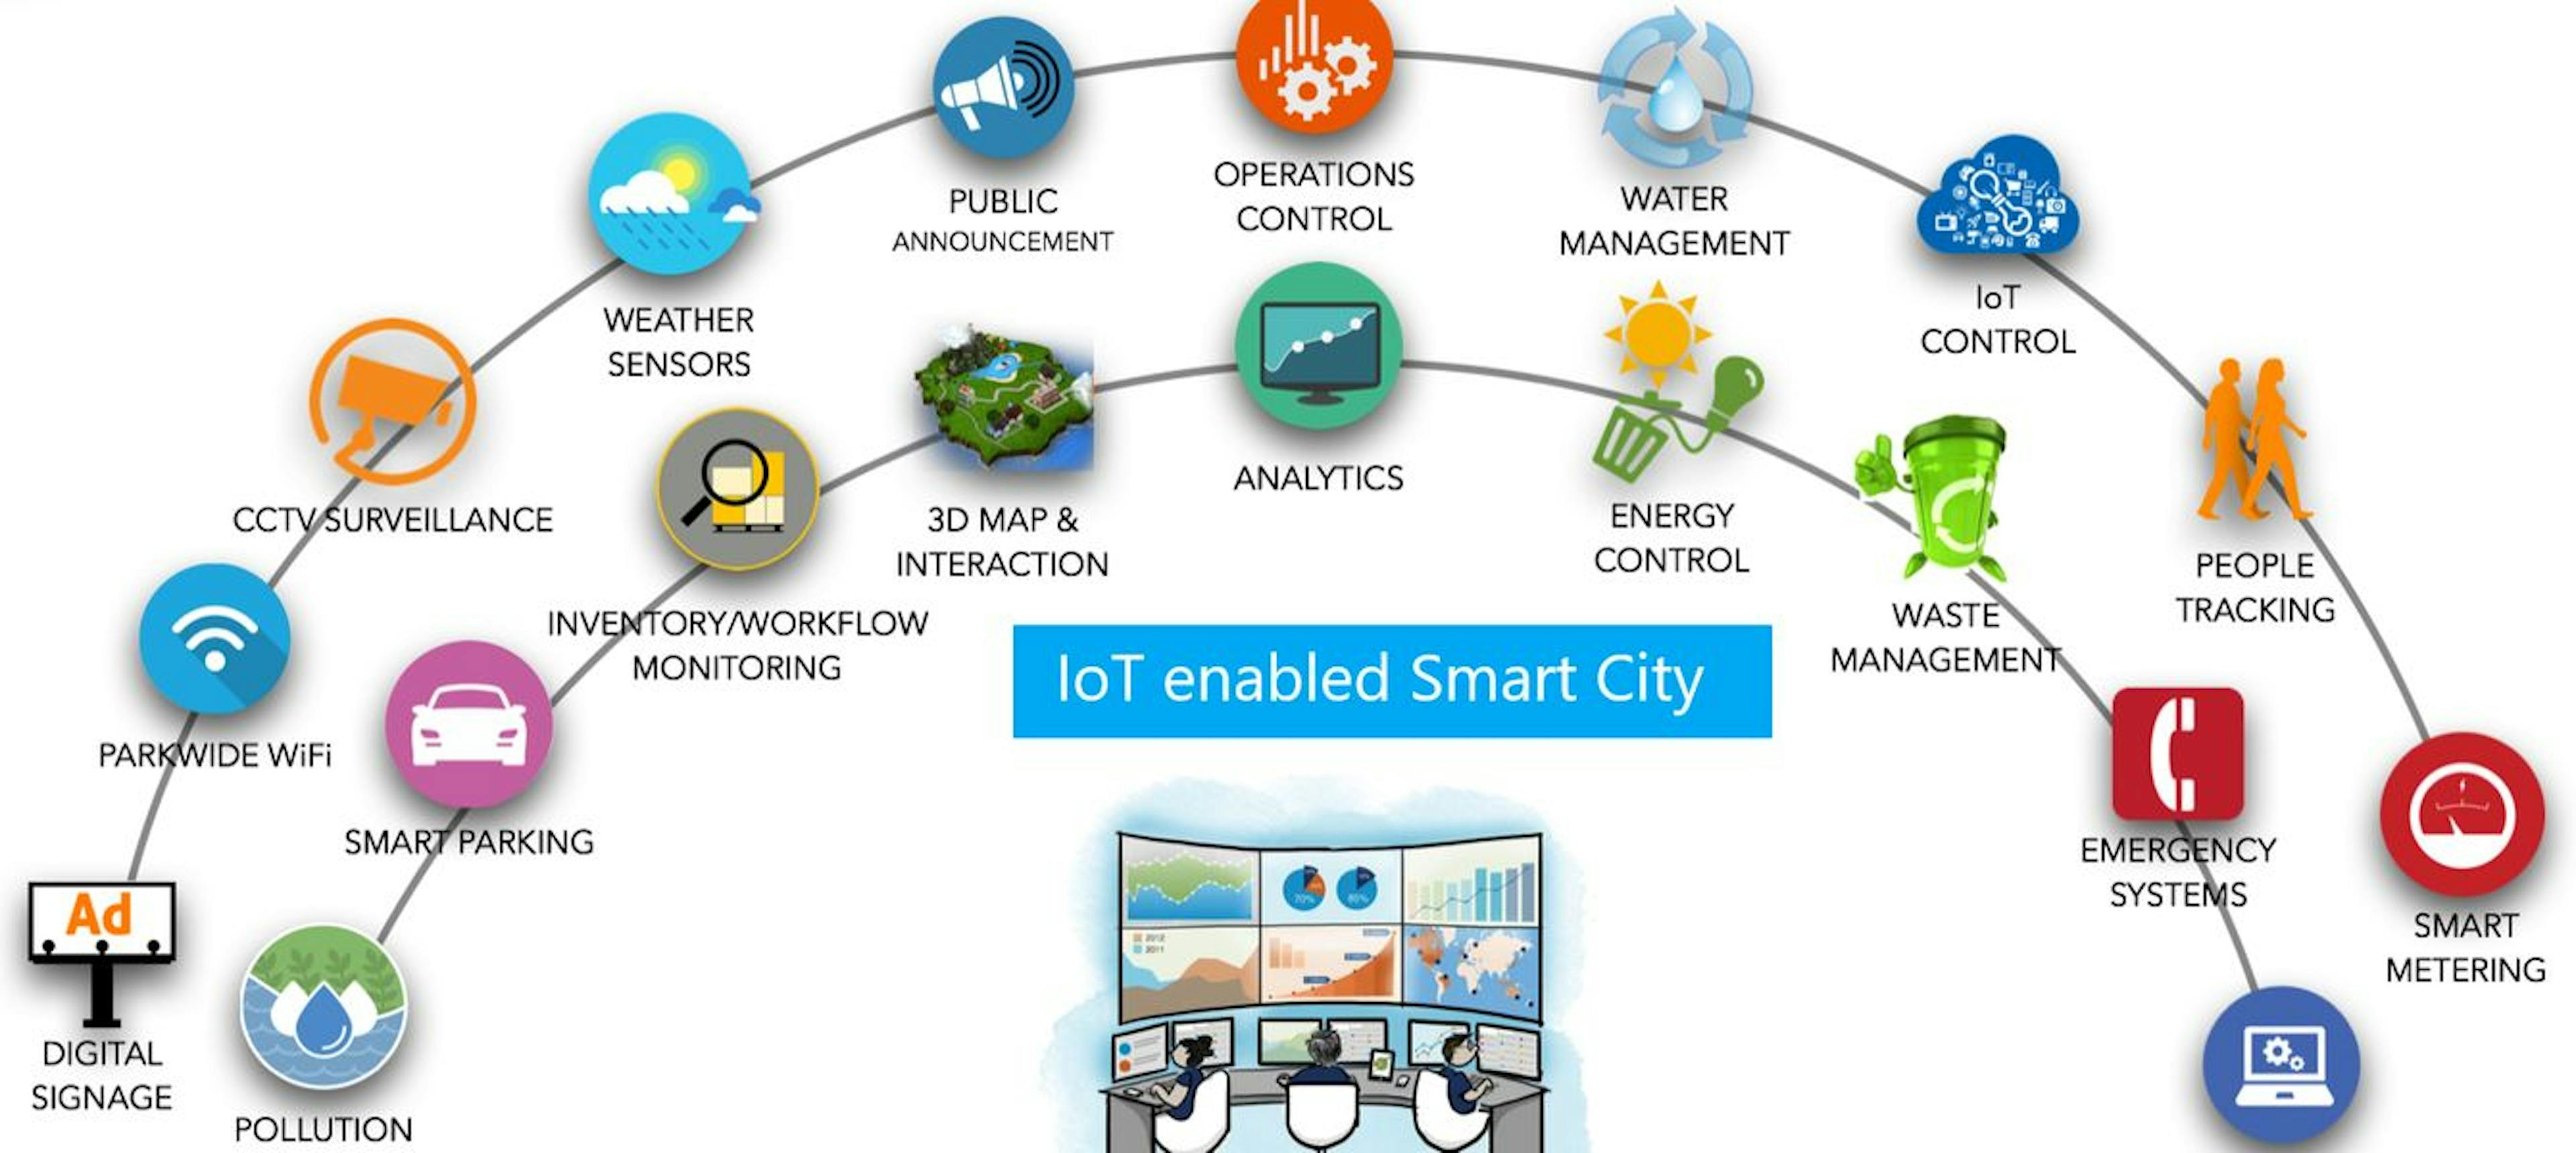 featured image - Using IoT to Solve Housing Problems and Improve Safety